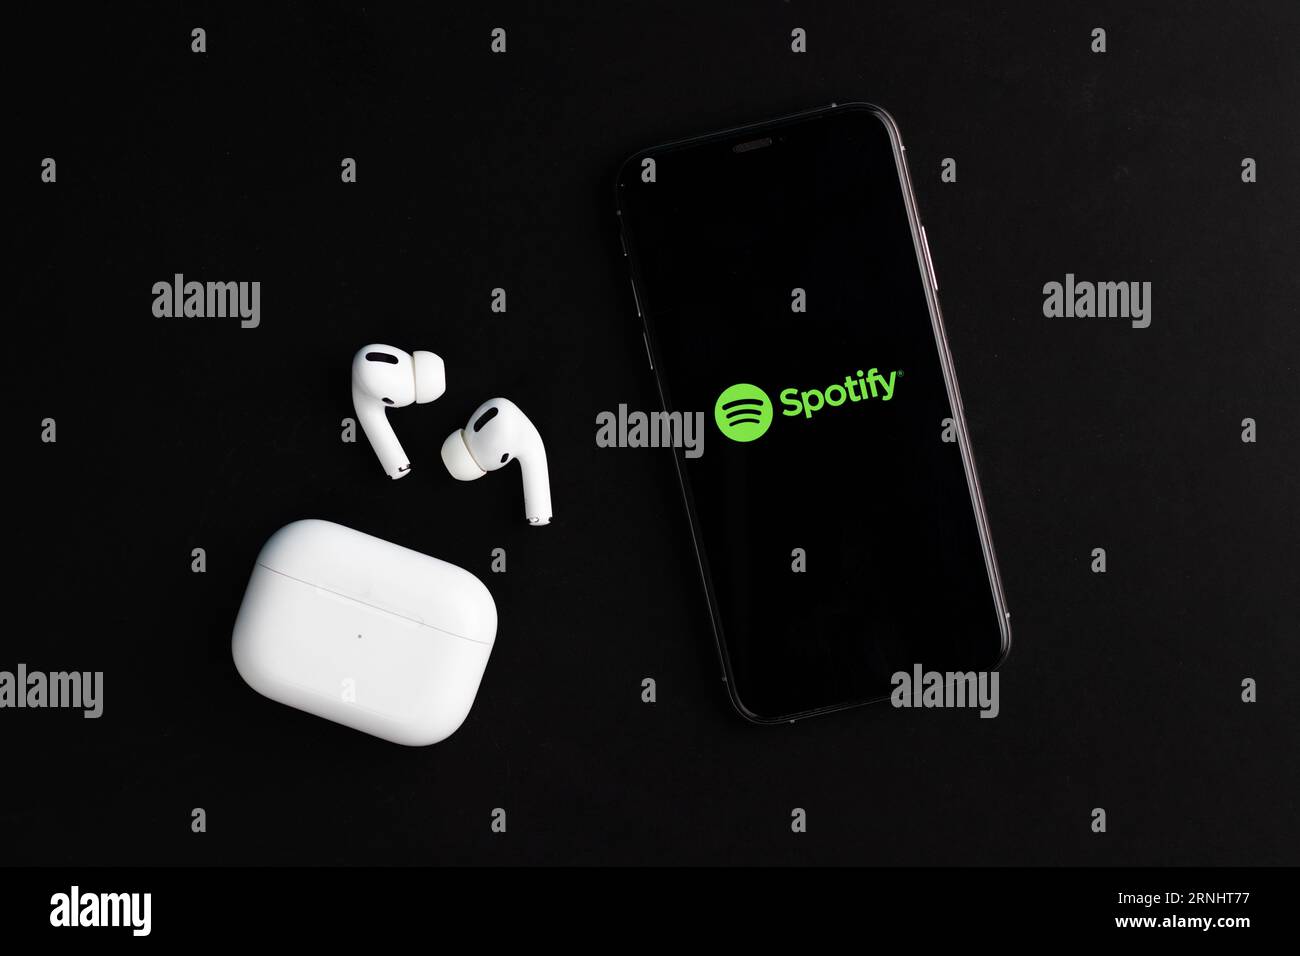 Spotify logo displayed on phone screen with Airpods Pro on the desk Stock Photo